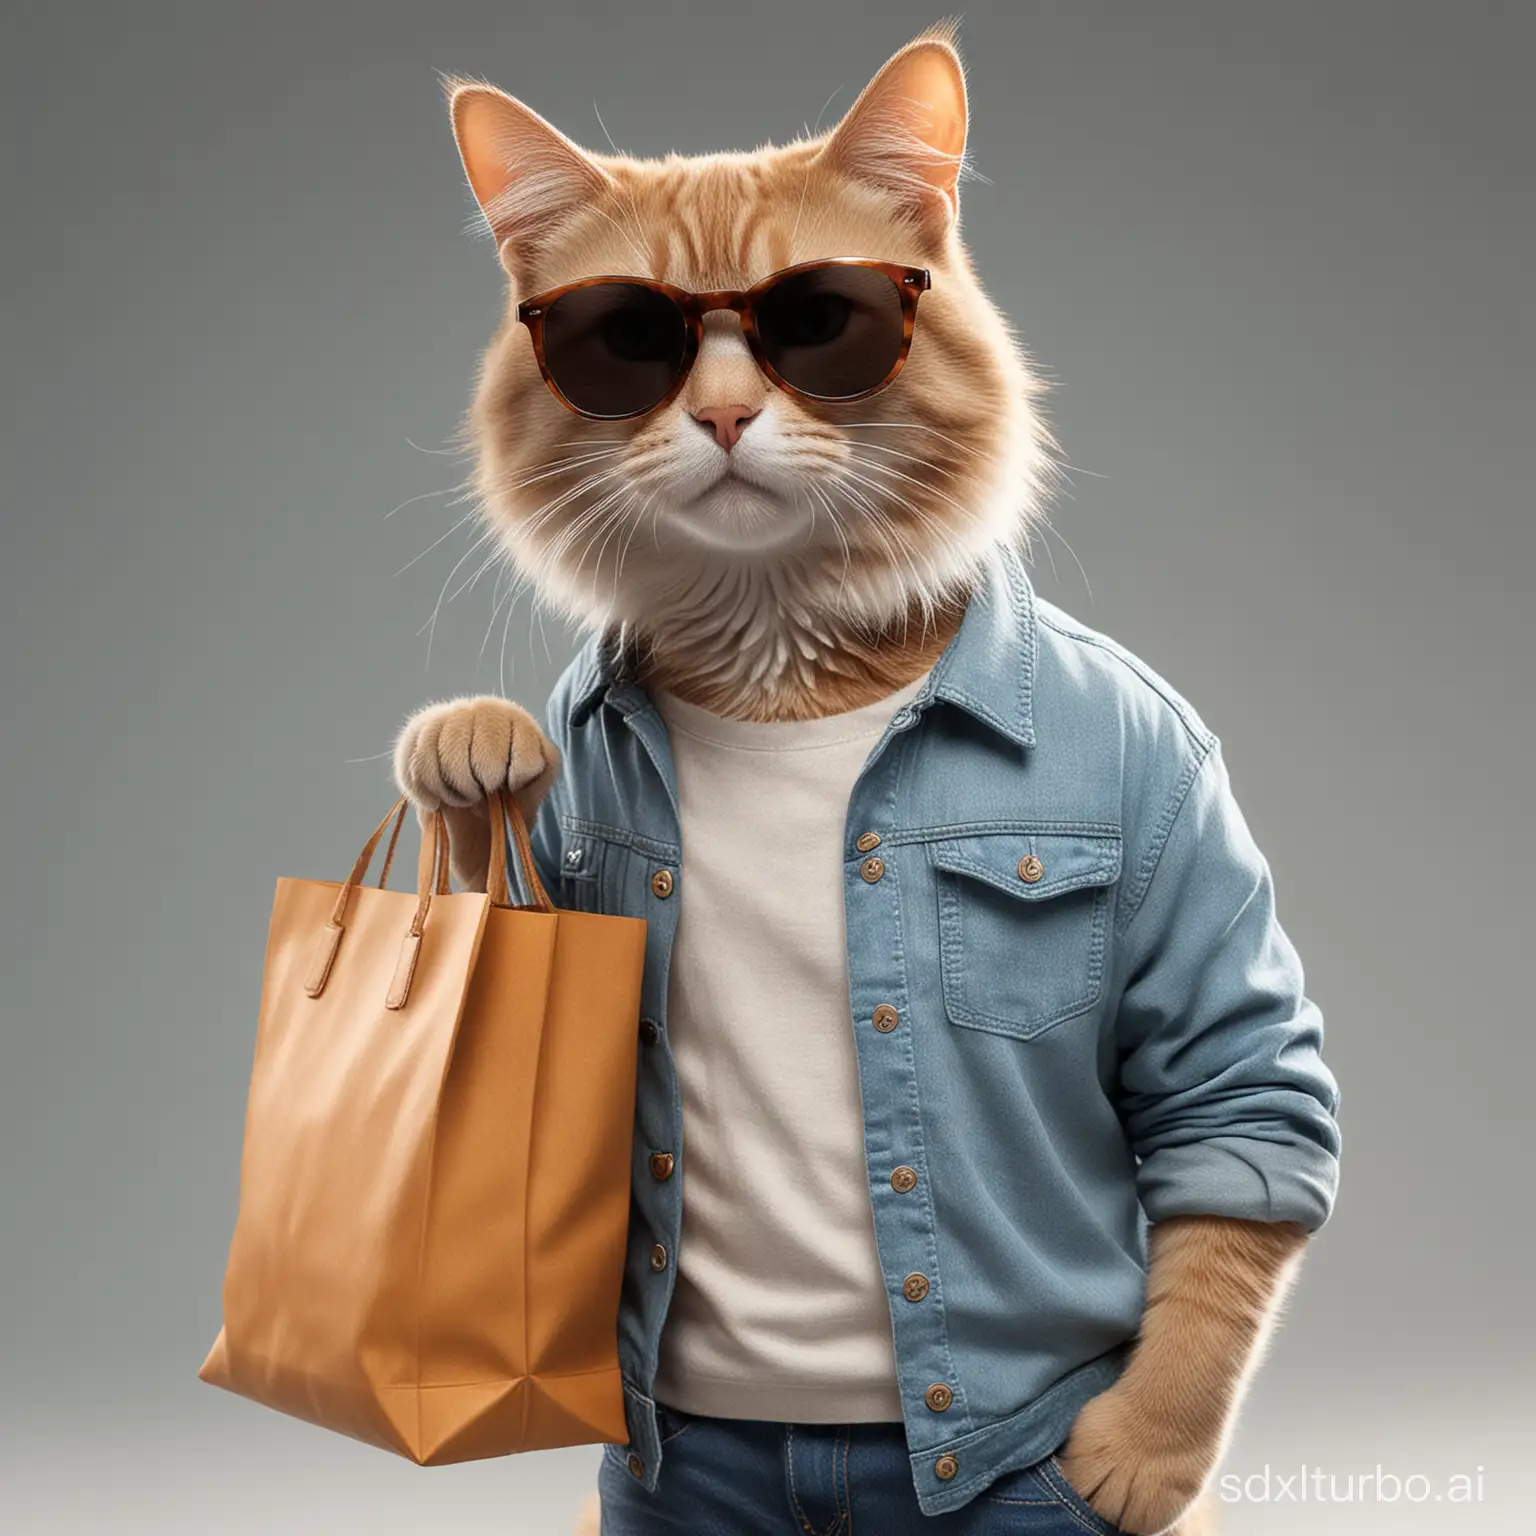 A cat model, wearing casual clothes and sunglasses, he is shopping, realistic photography